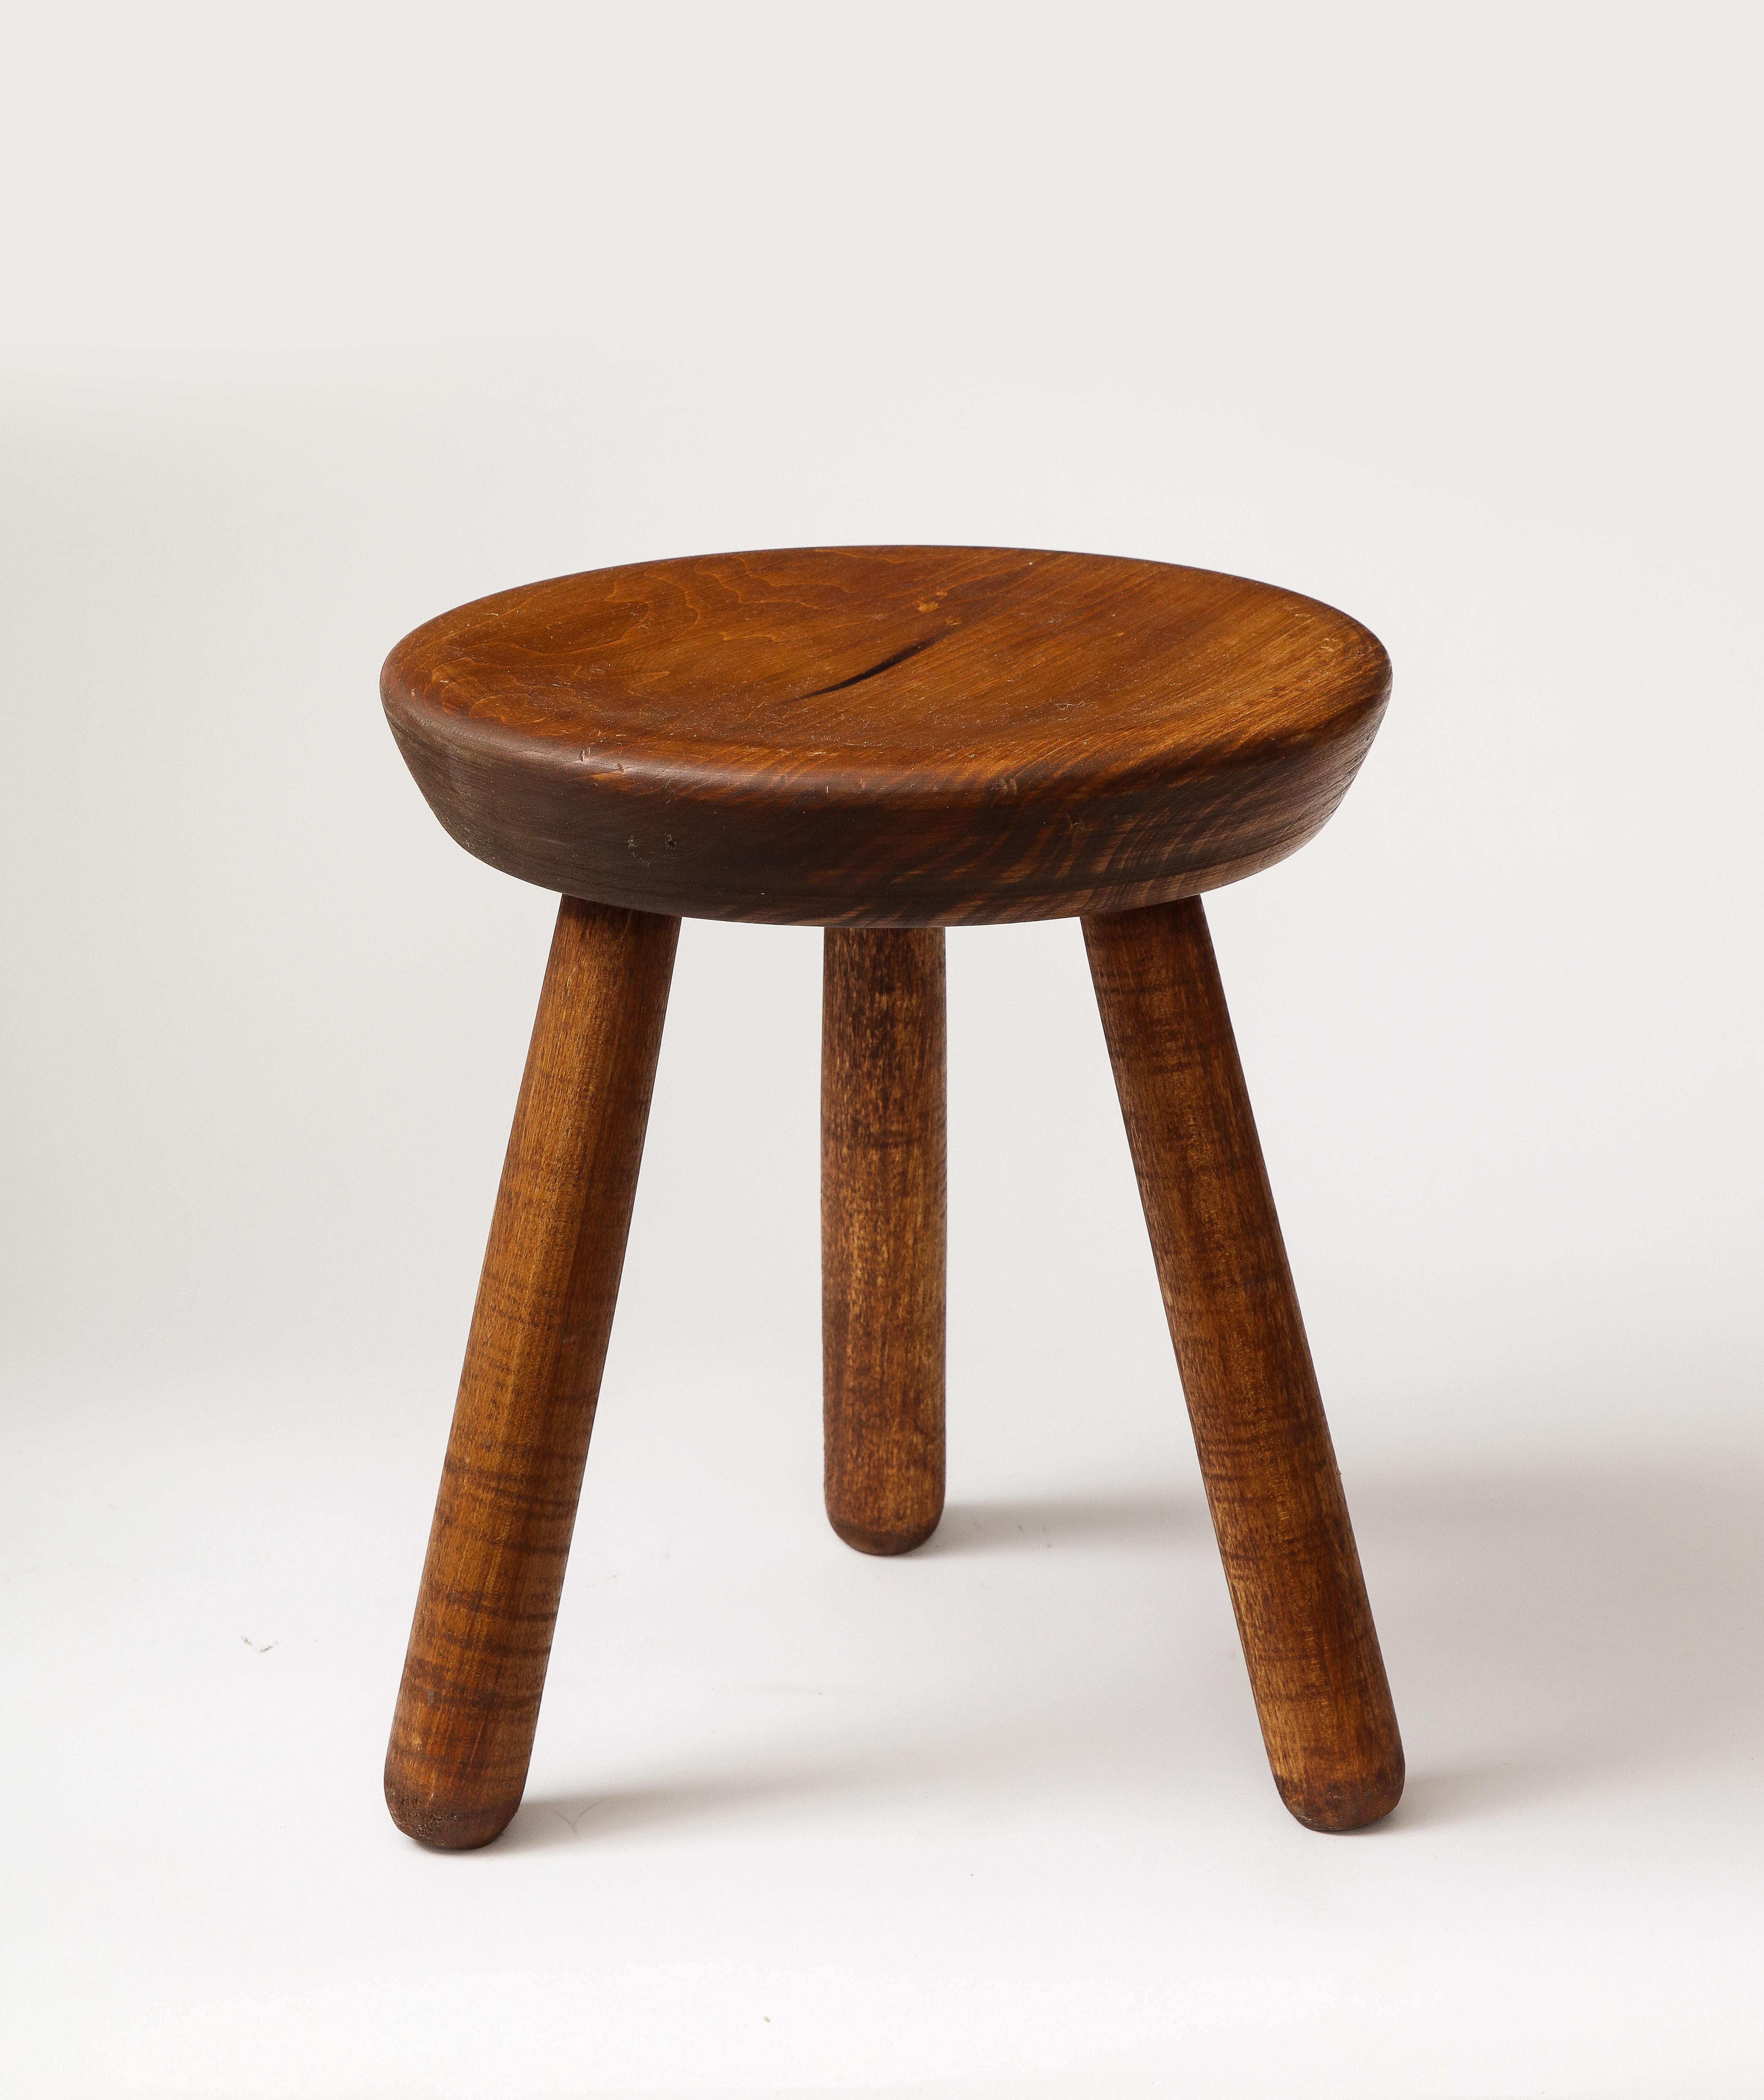 Low Stained Pine Milking Stool, 21st C.   In Excellent Condition For Sale In New York City, NY